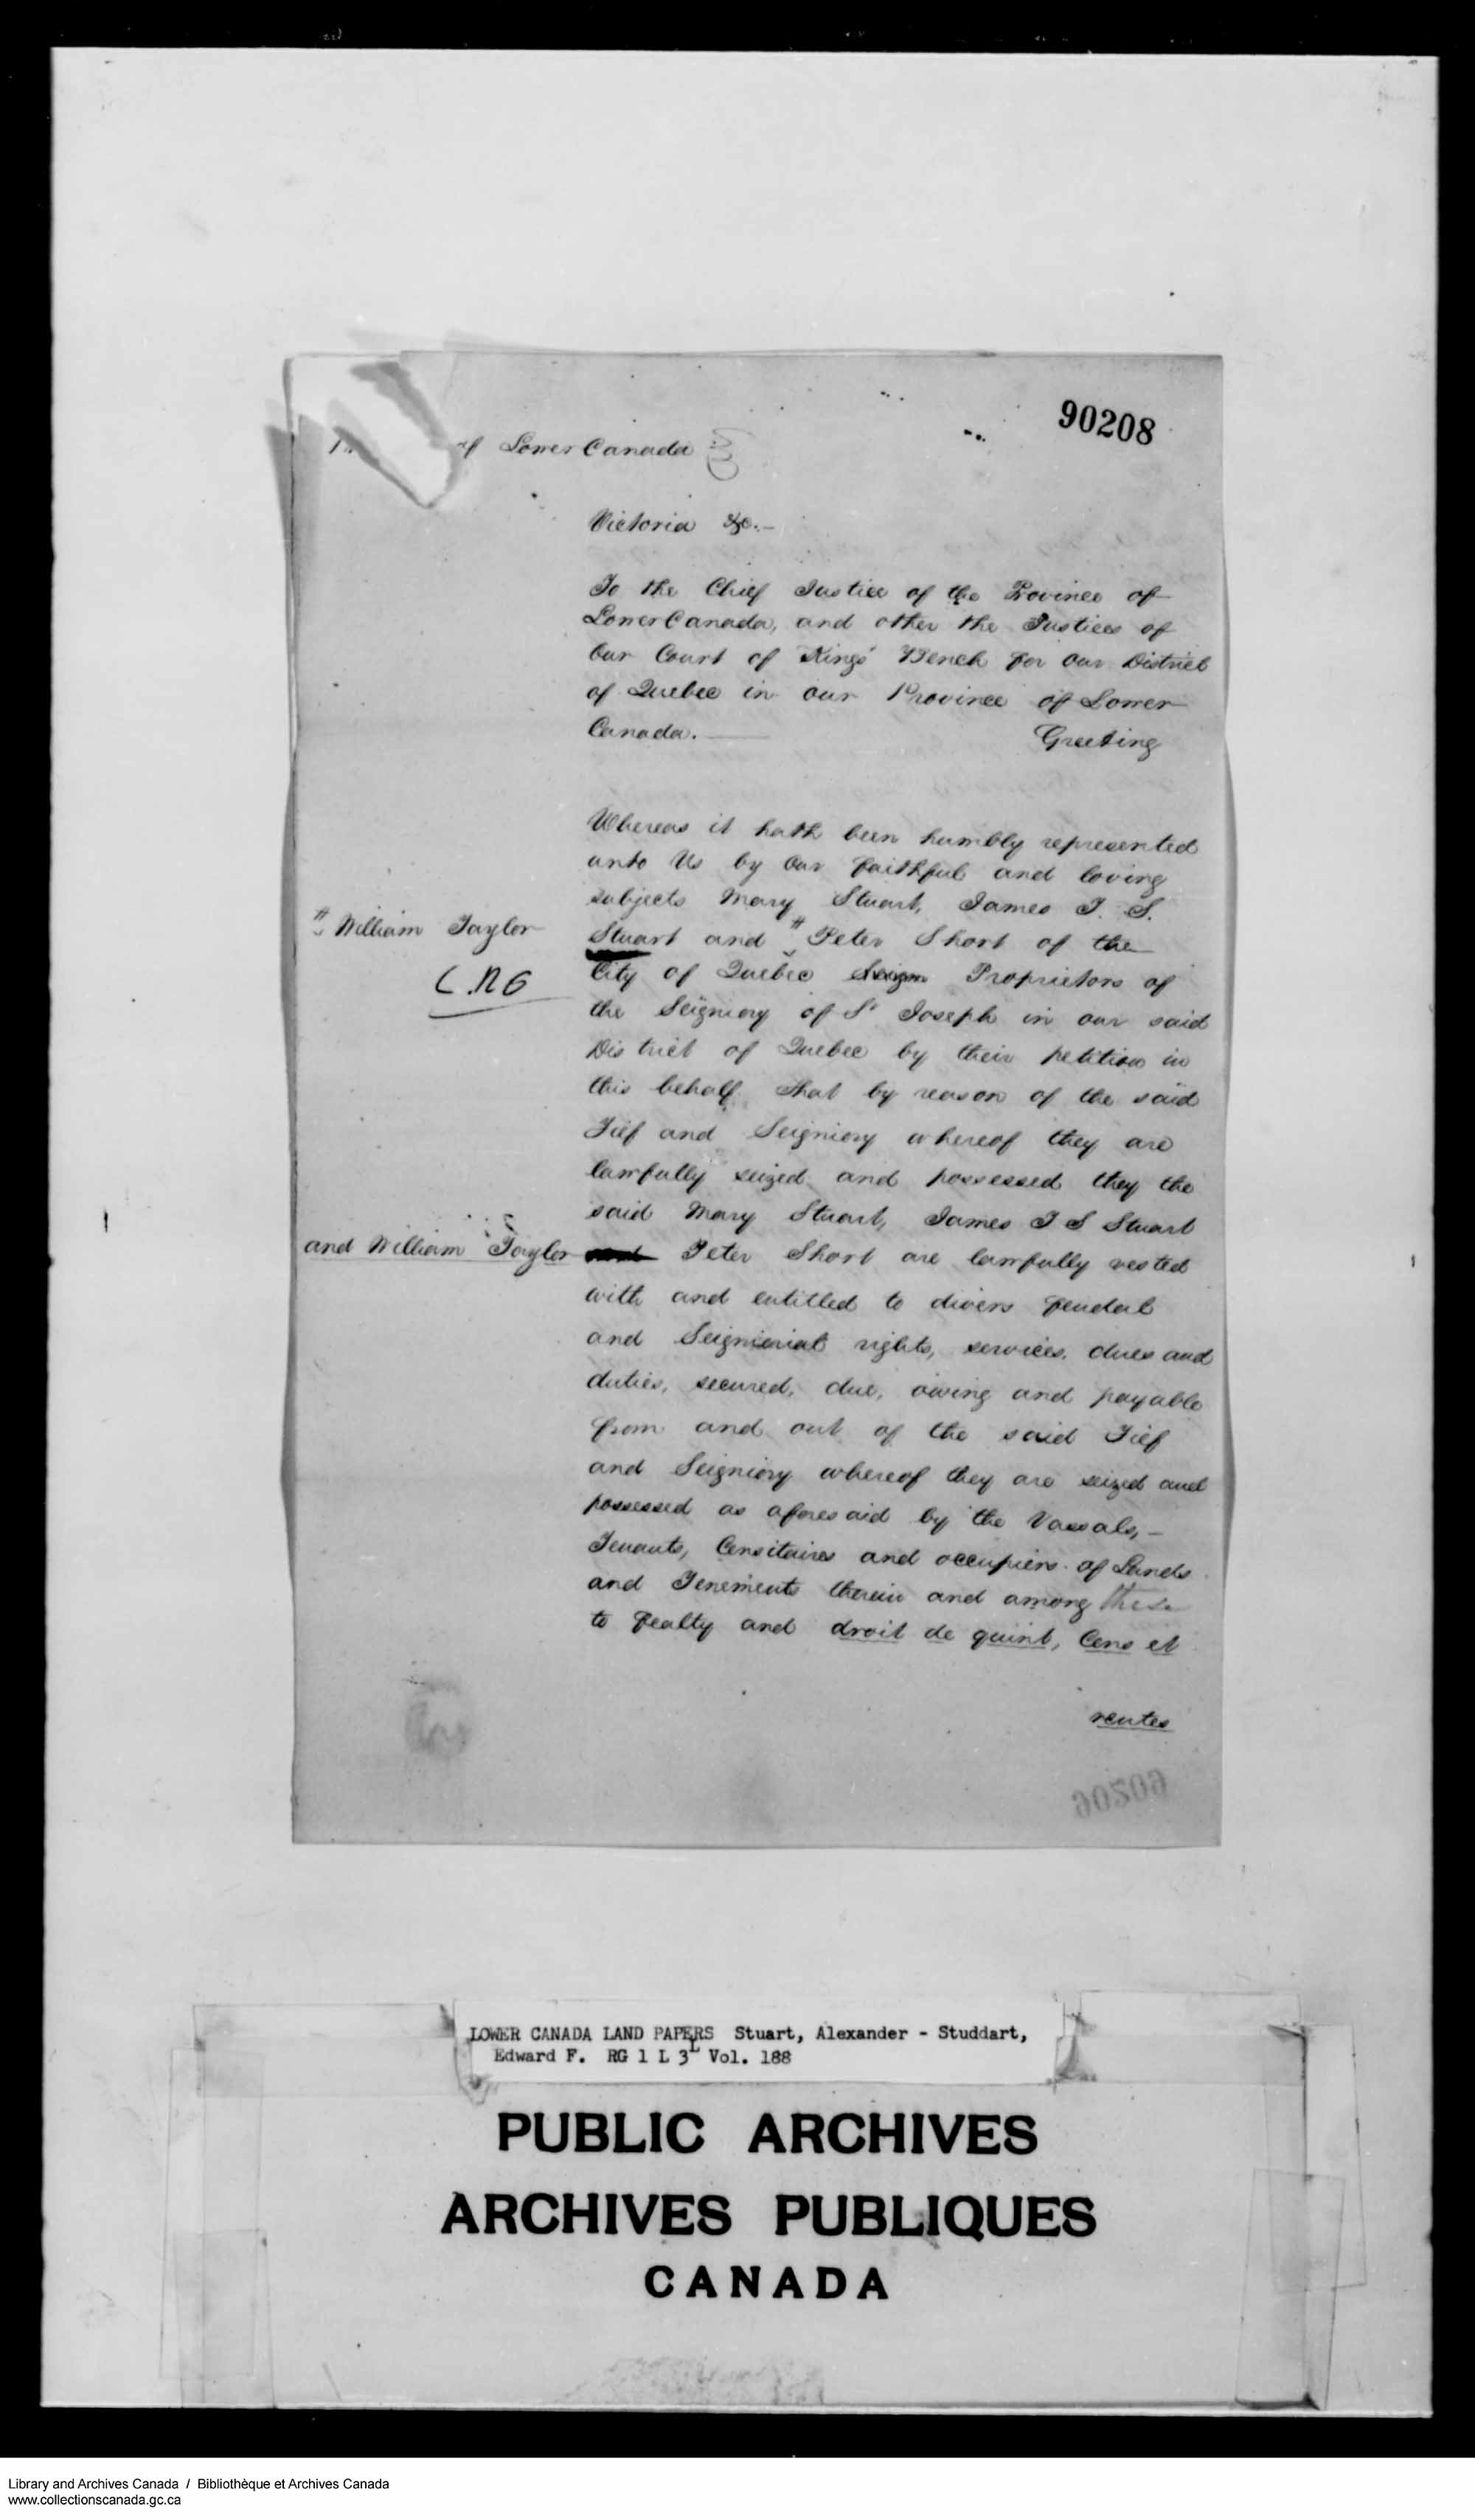 Digitized page of  for Image No.: e008737336